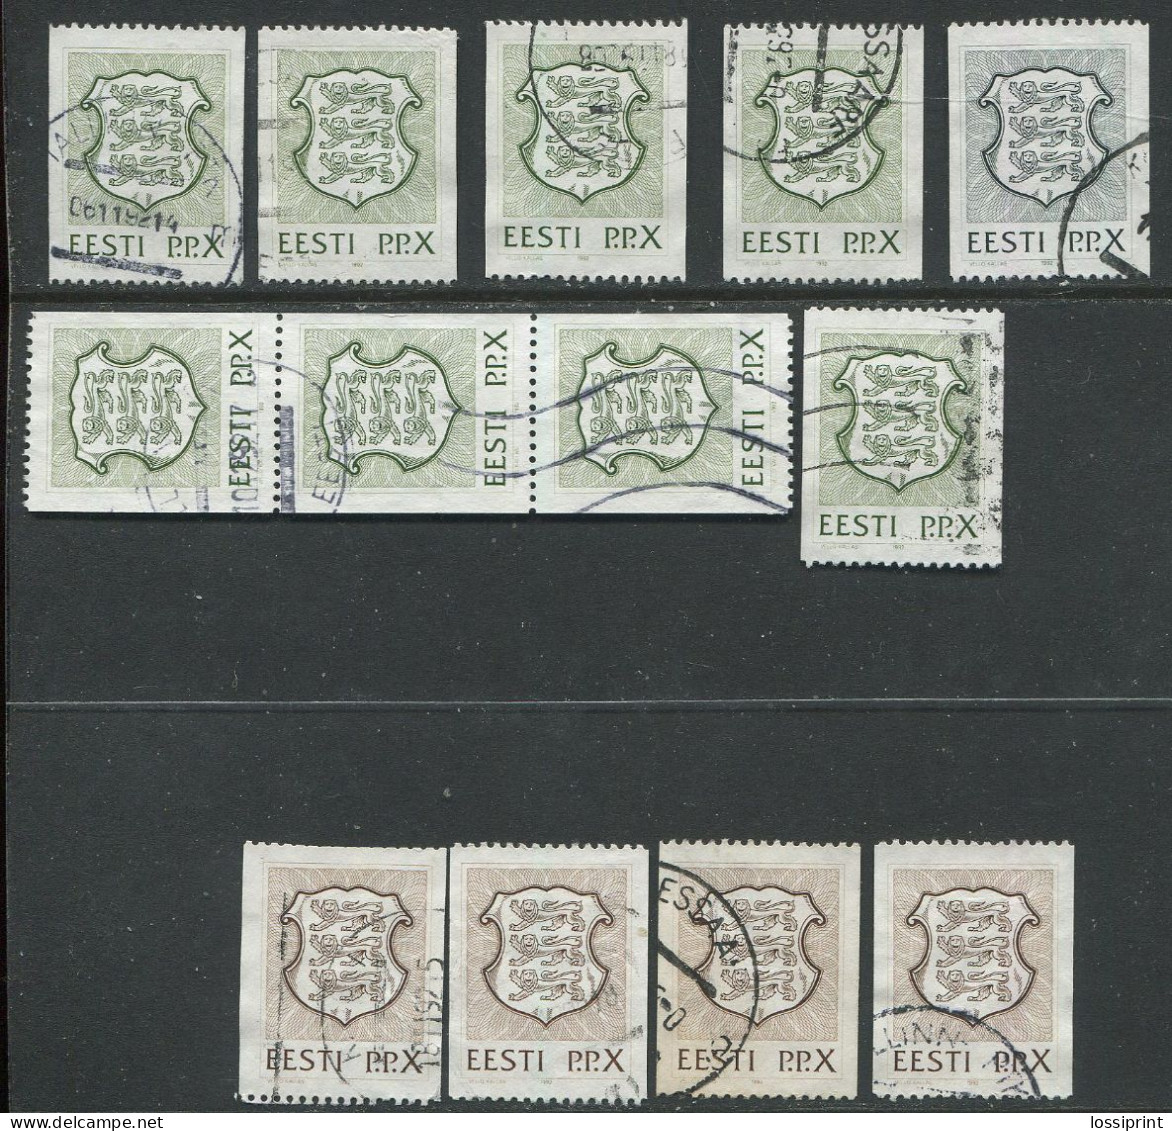 Estonia:Used Numbered Stamps P.P.X. All Issues, Numbers Seen On Second Scan, 1992 - Estonie